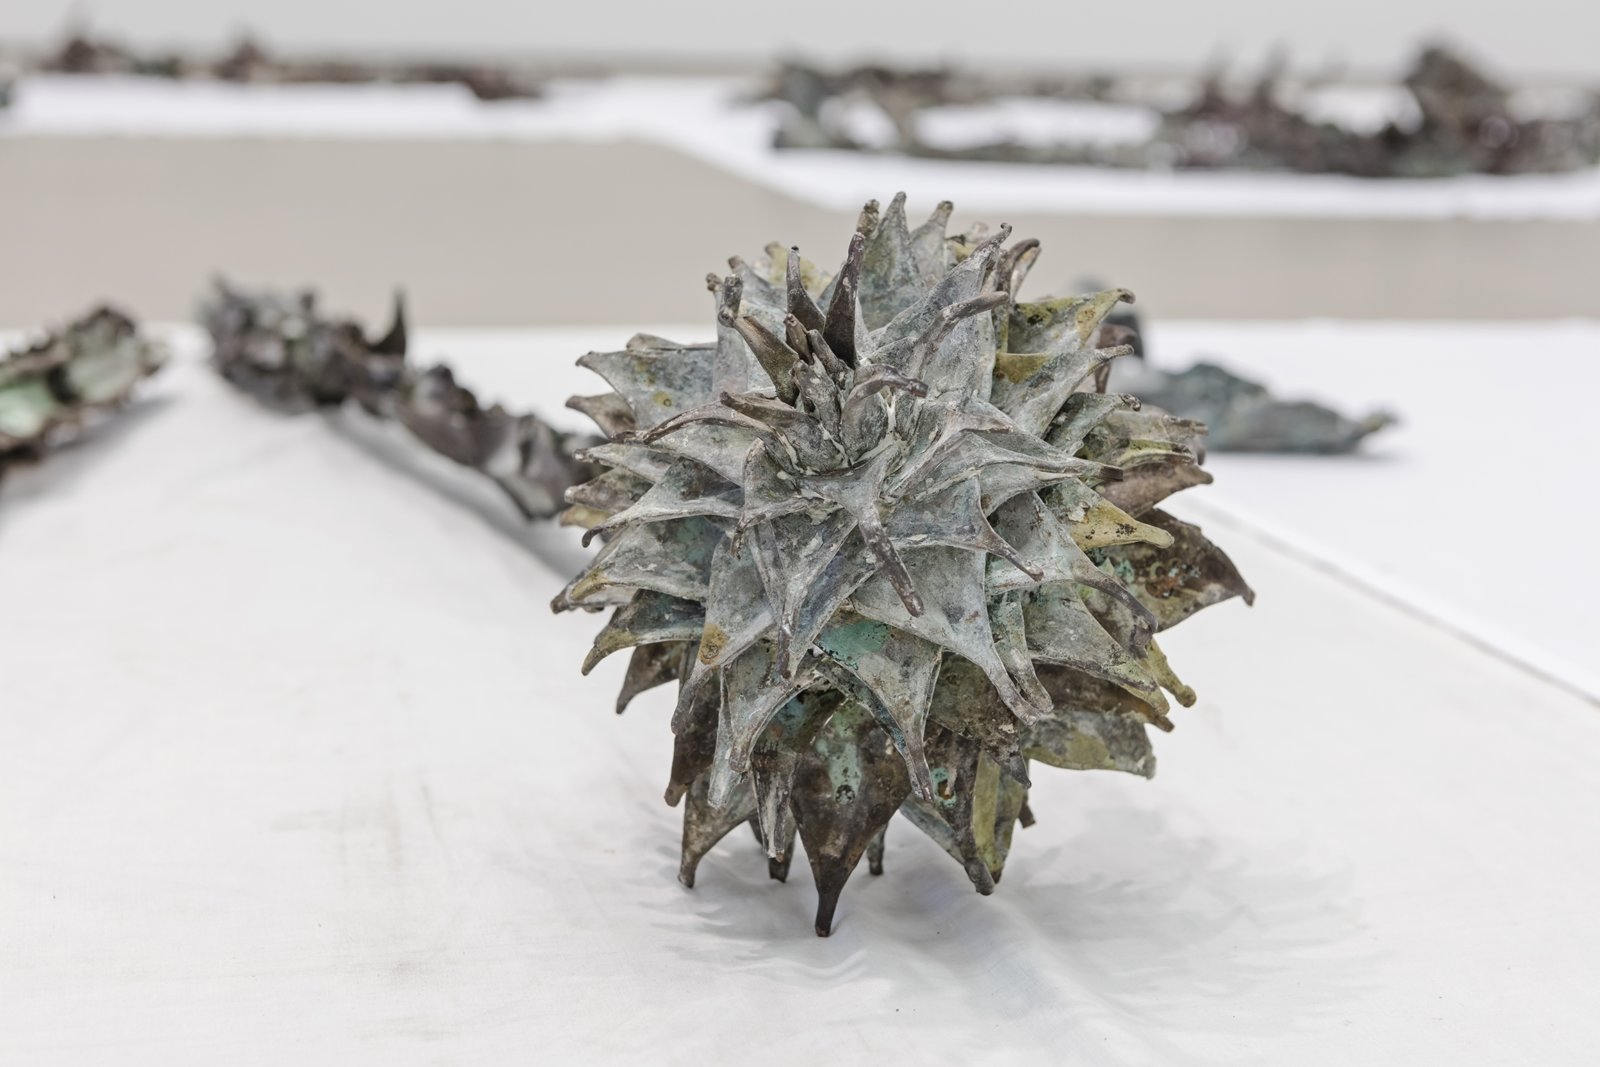 Abbas Akhavan, Study for a Monument (detail), 2013–ongoing, cast bronze, cotton sheets, dimensions variable. Installation view, variations on a garden, Mercer Union, Toronto, Canada, 2015